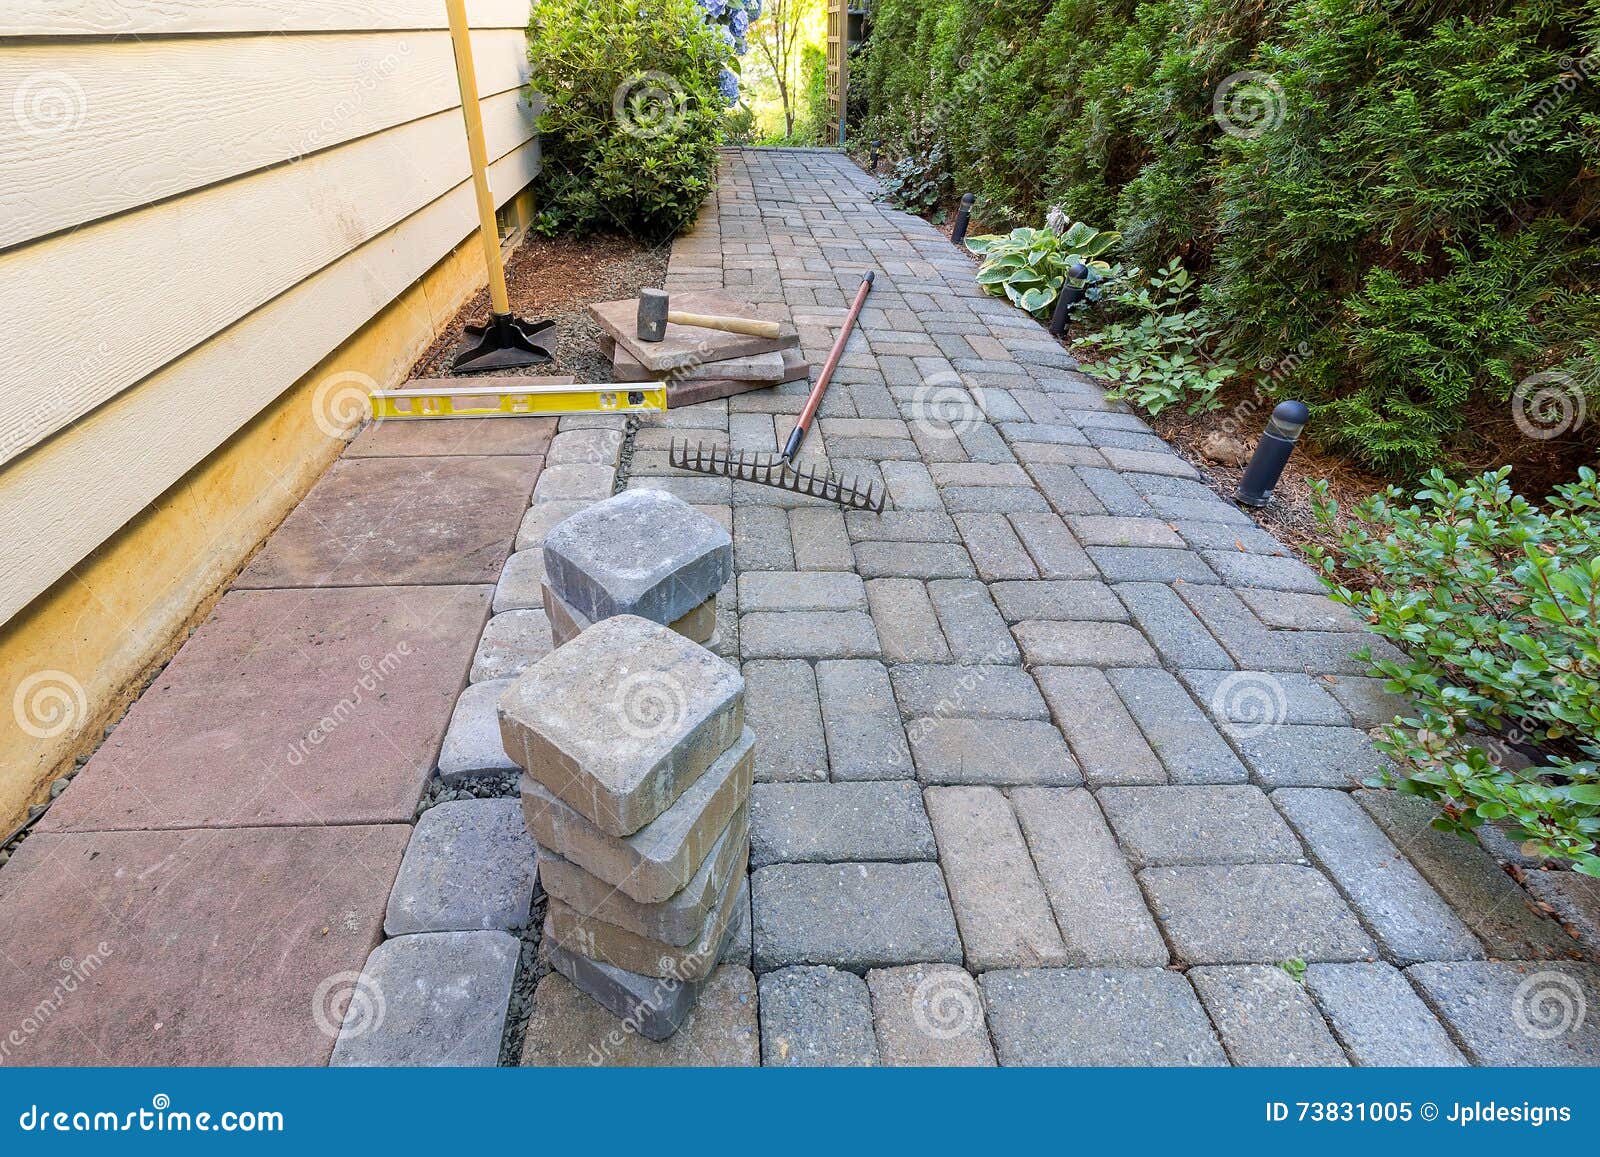 stone pavers and tools for side yard landscaping